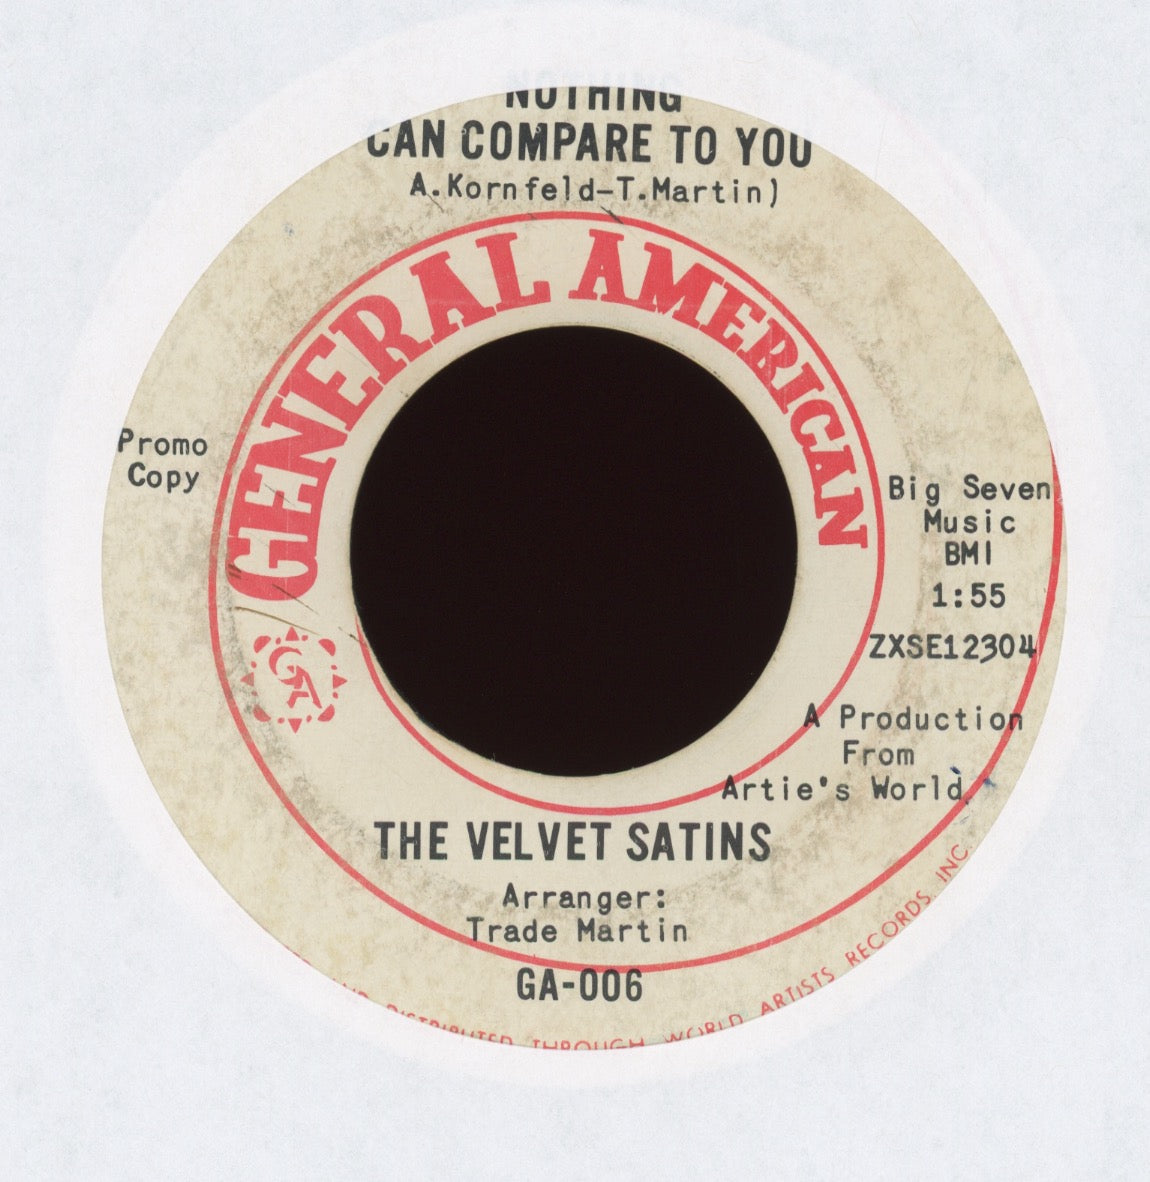 The Velvet Satins - Nothing Can Compare To You on General American Promo Northern Soul 45